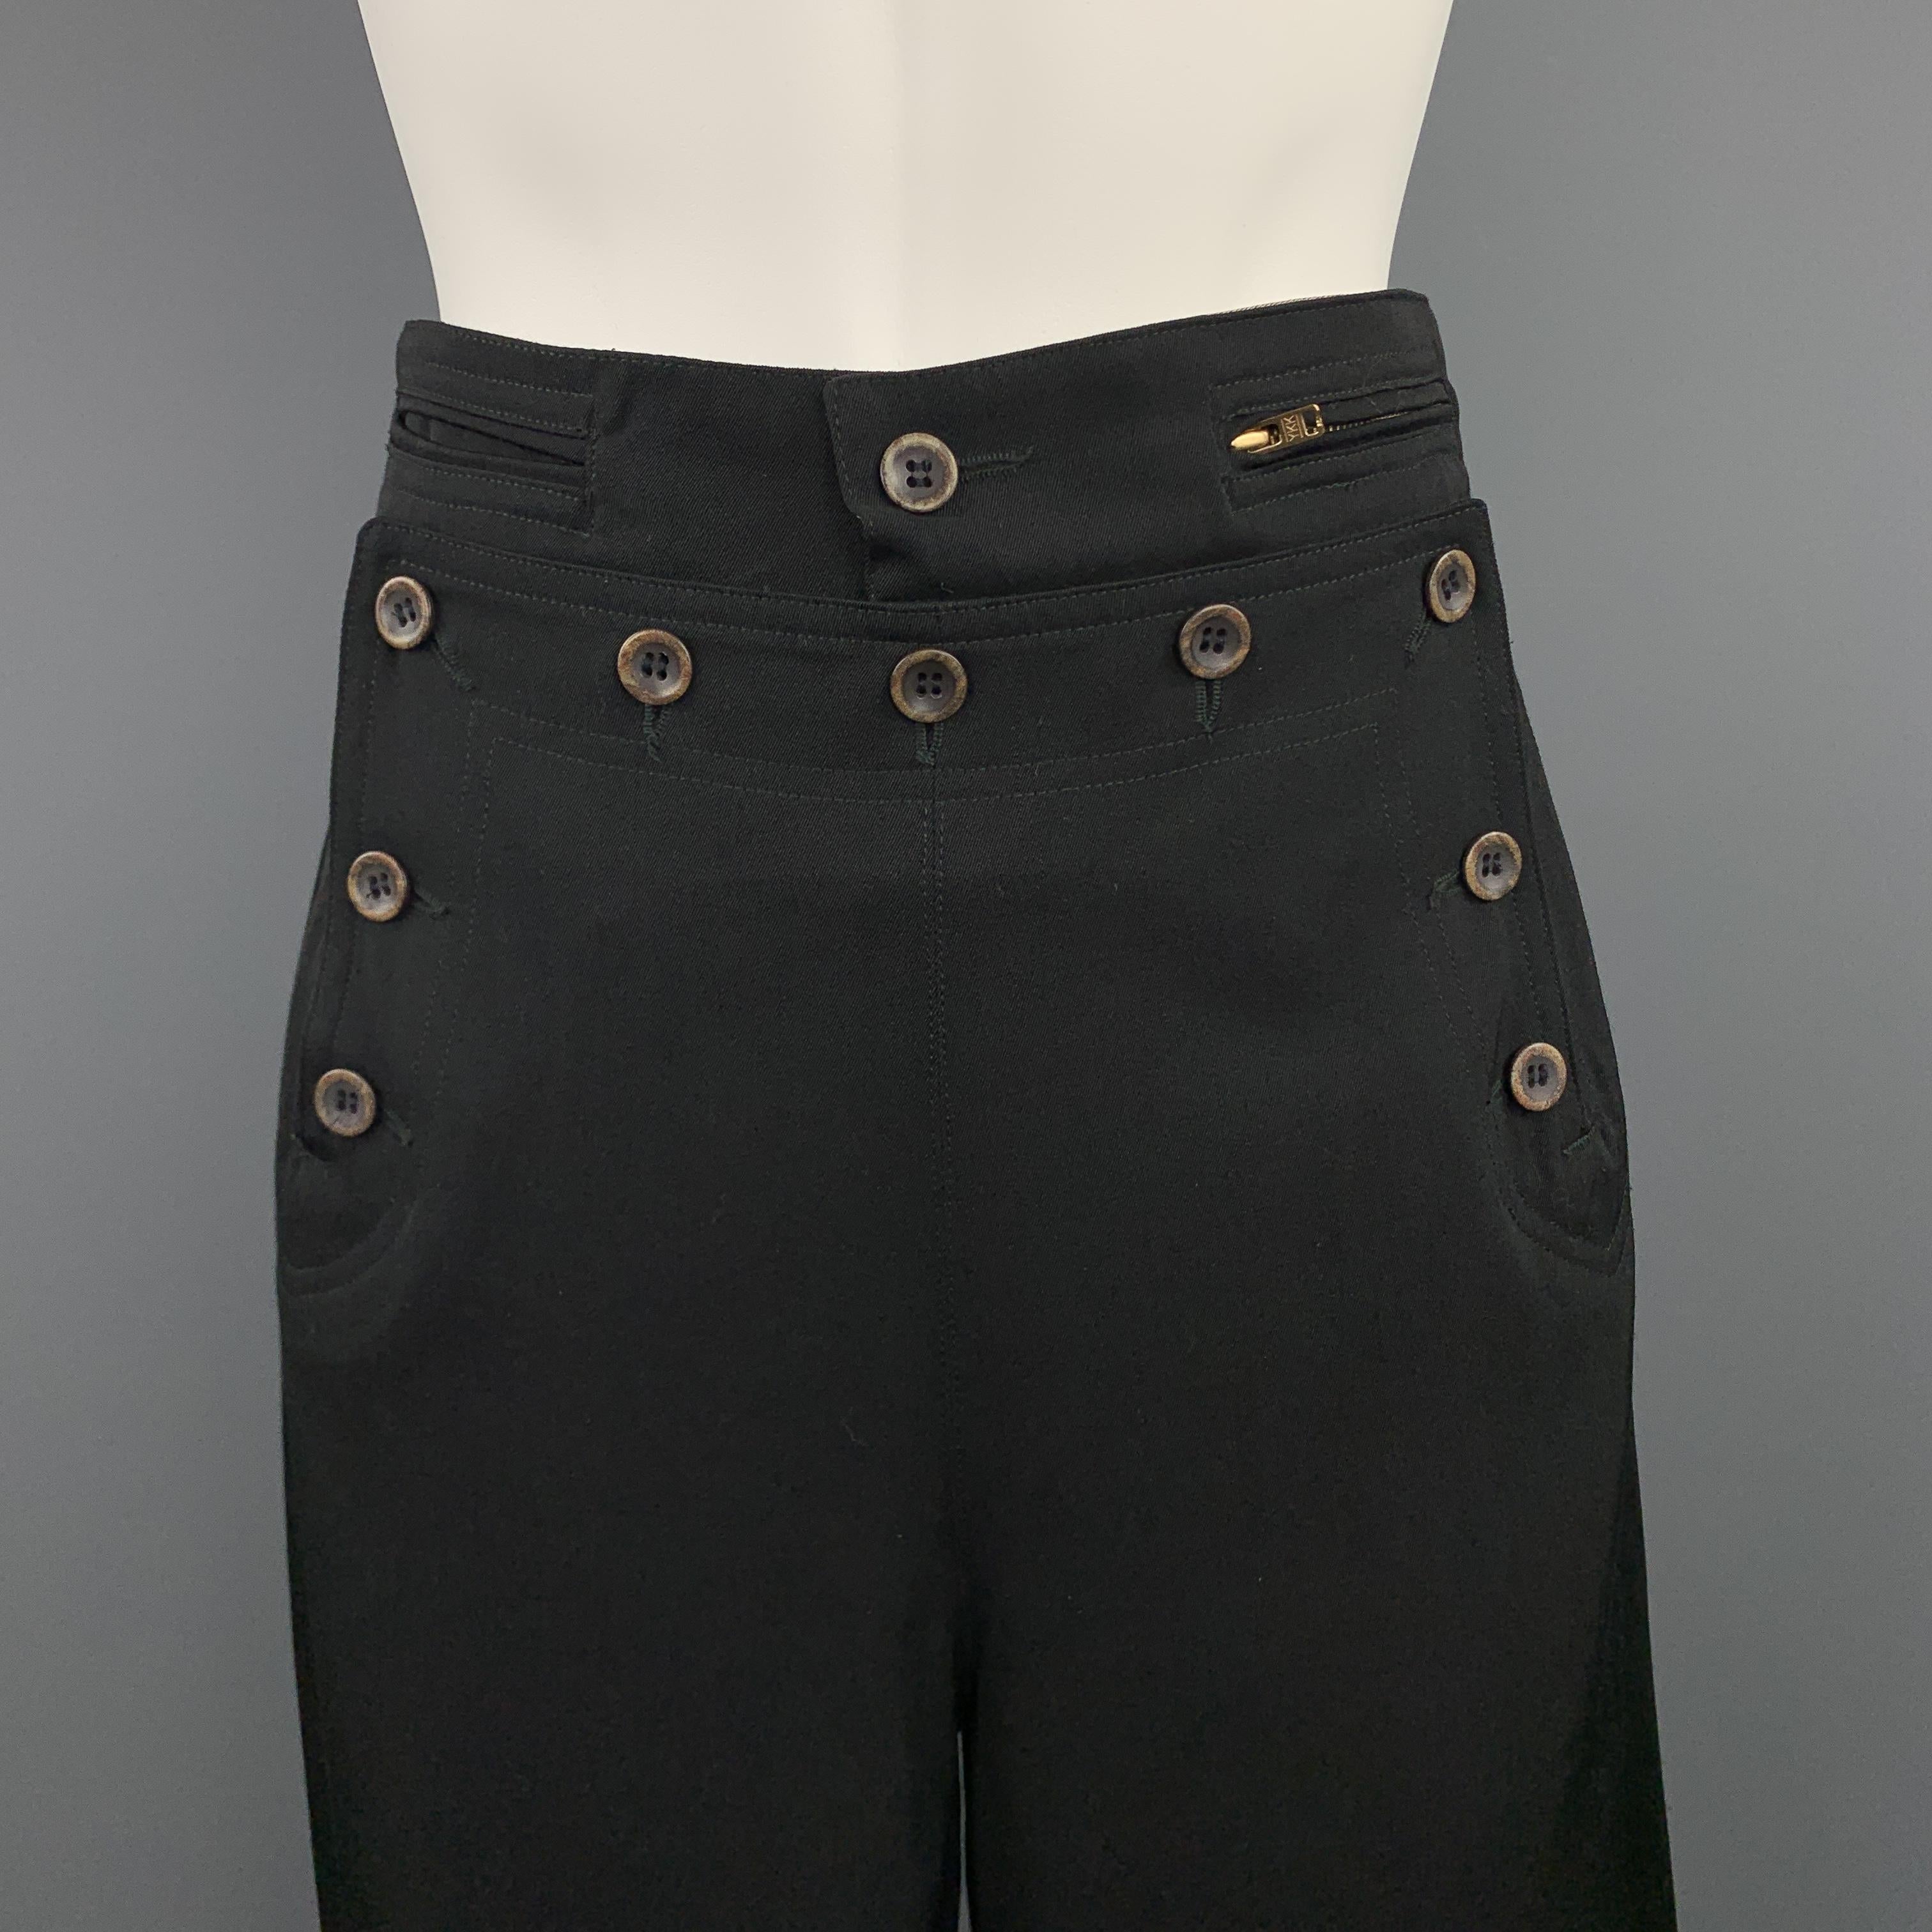 Vintage JEAN PAUL GAULTIER CLASSIQUE dress pants come in black wool twill with a button flap closure front, wide leg, satin tuxedo stripe, and lace up back. Made in Italy.

Excellent Pre-Owned Condition.
Marked: US 8

Measurements:

Waist: 29